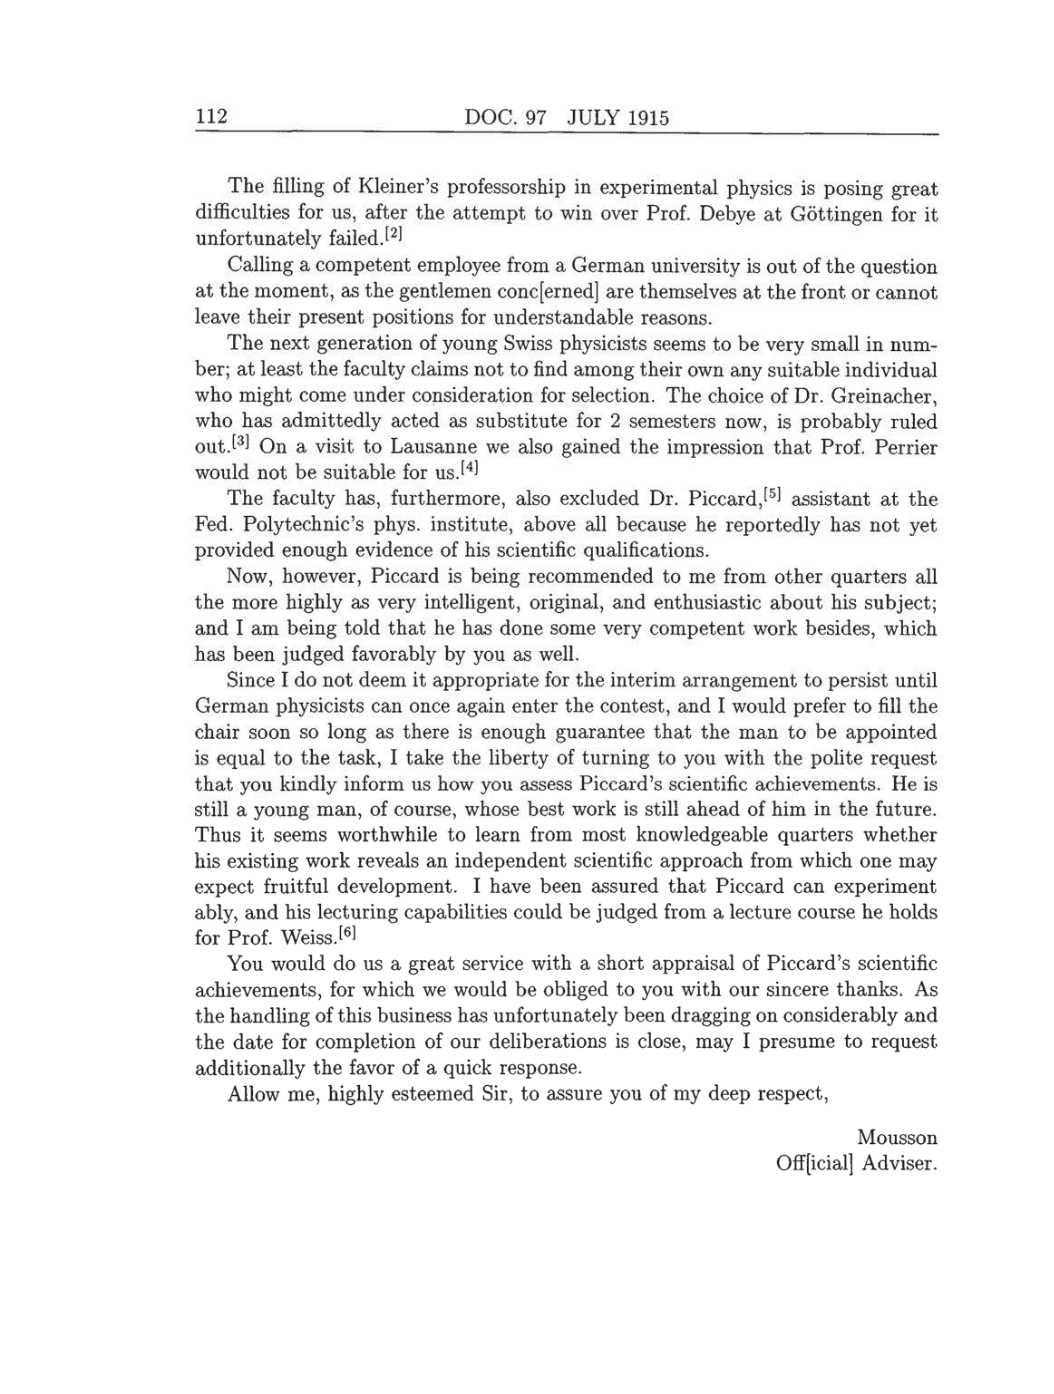 Volume 8: The Berlin Years: Correspondence, 1914-1918 (English translation supplement) page 112